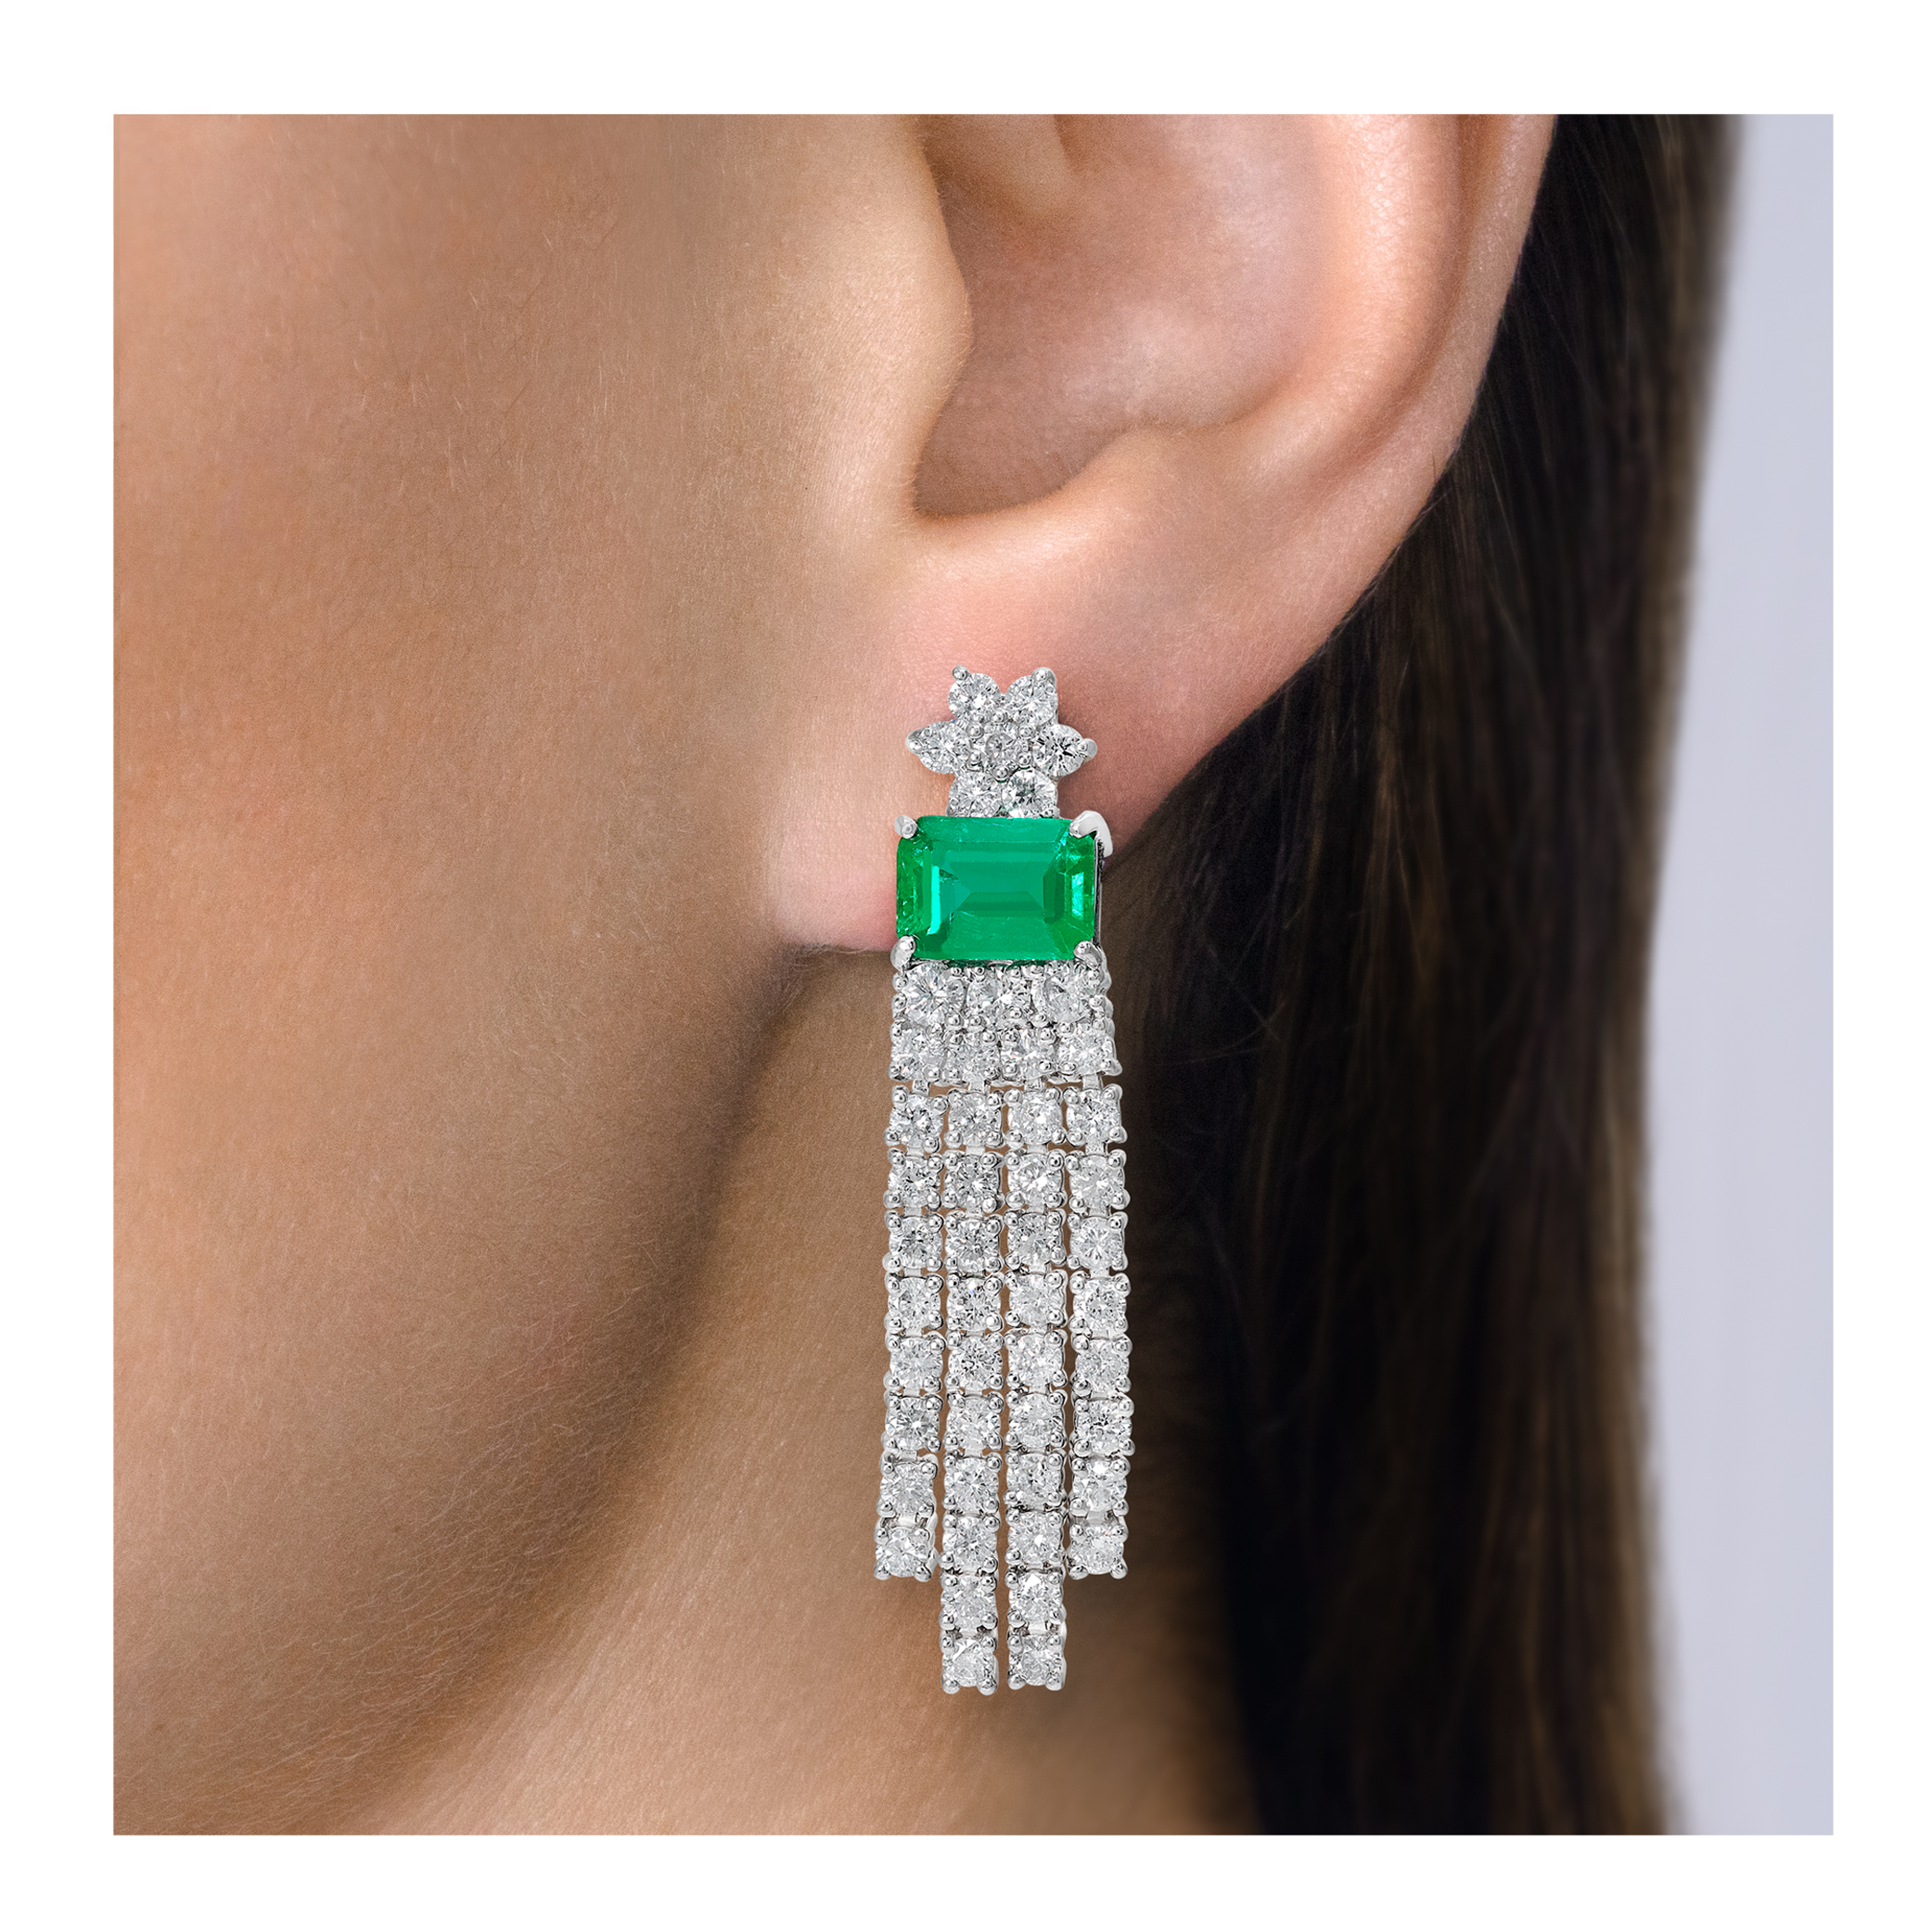 Dangling earrings with 3.28 carats in emerald and 4.24 carats in diamonds in platinum (Stones)